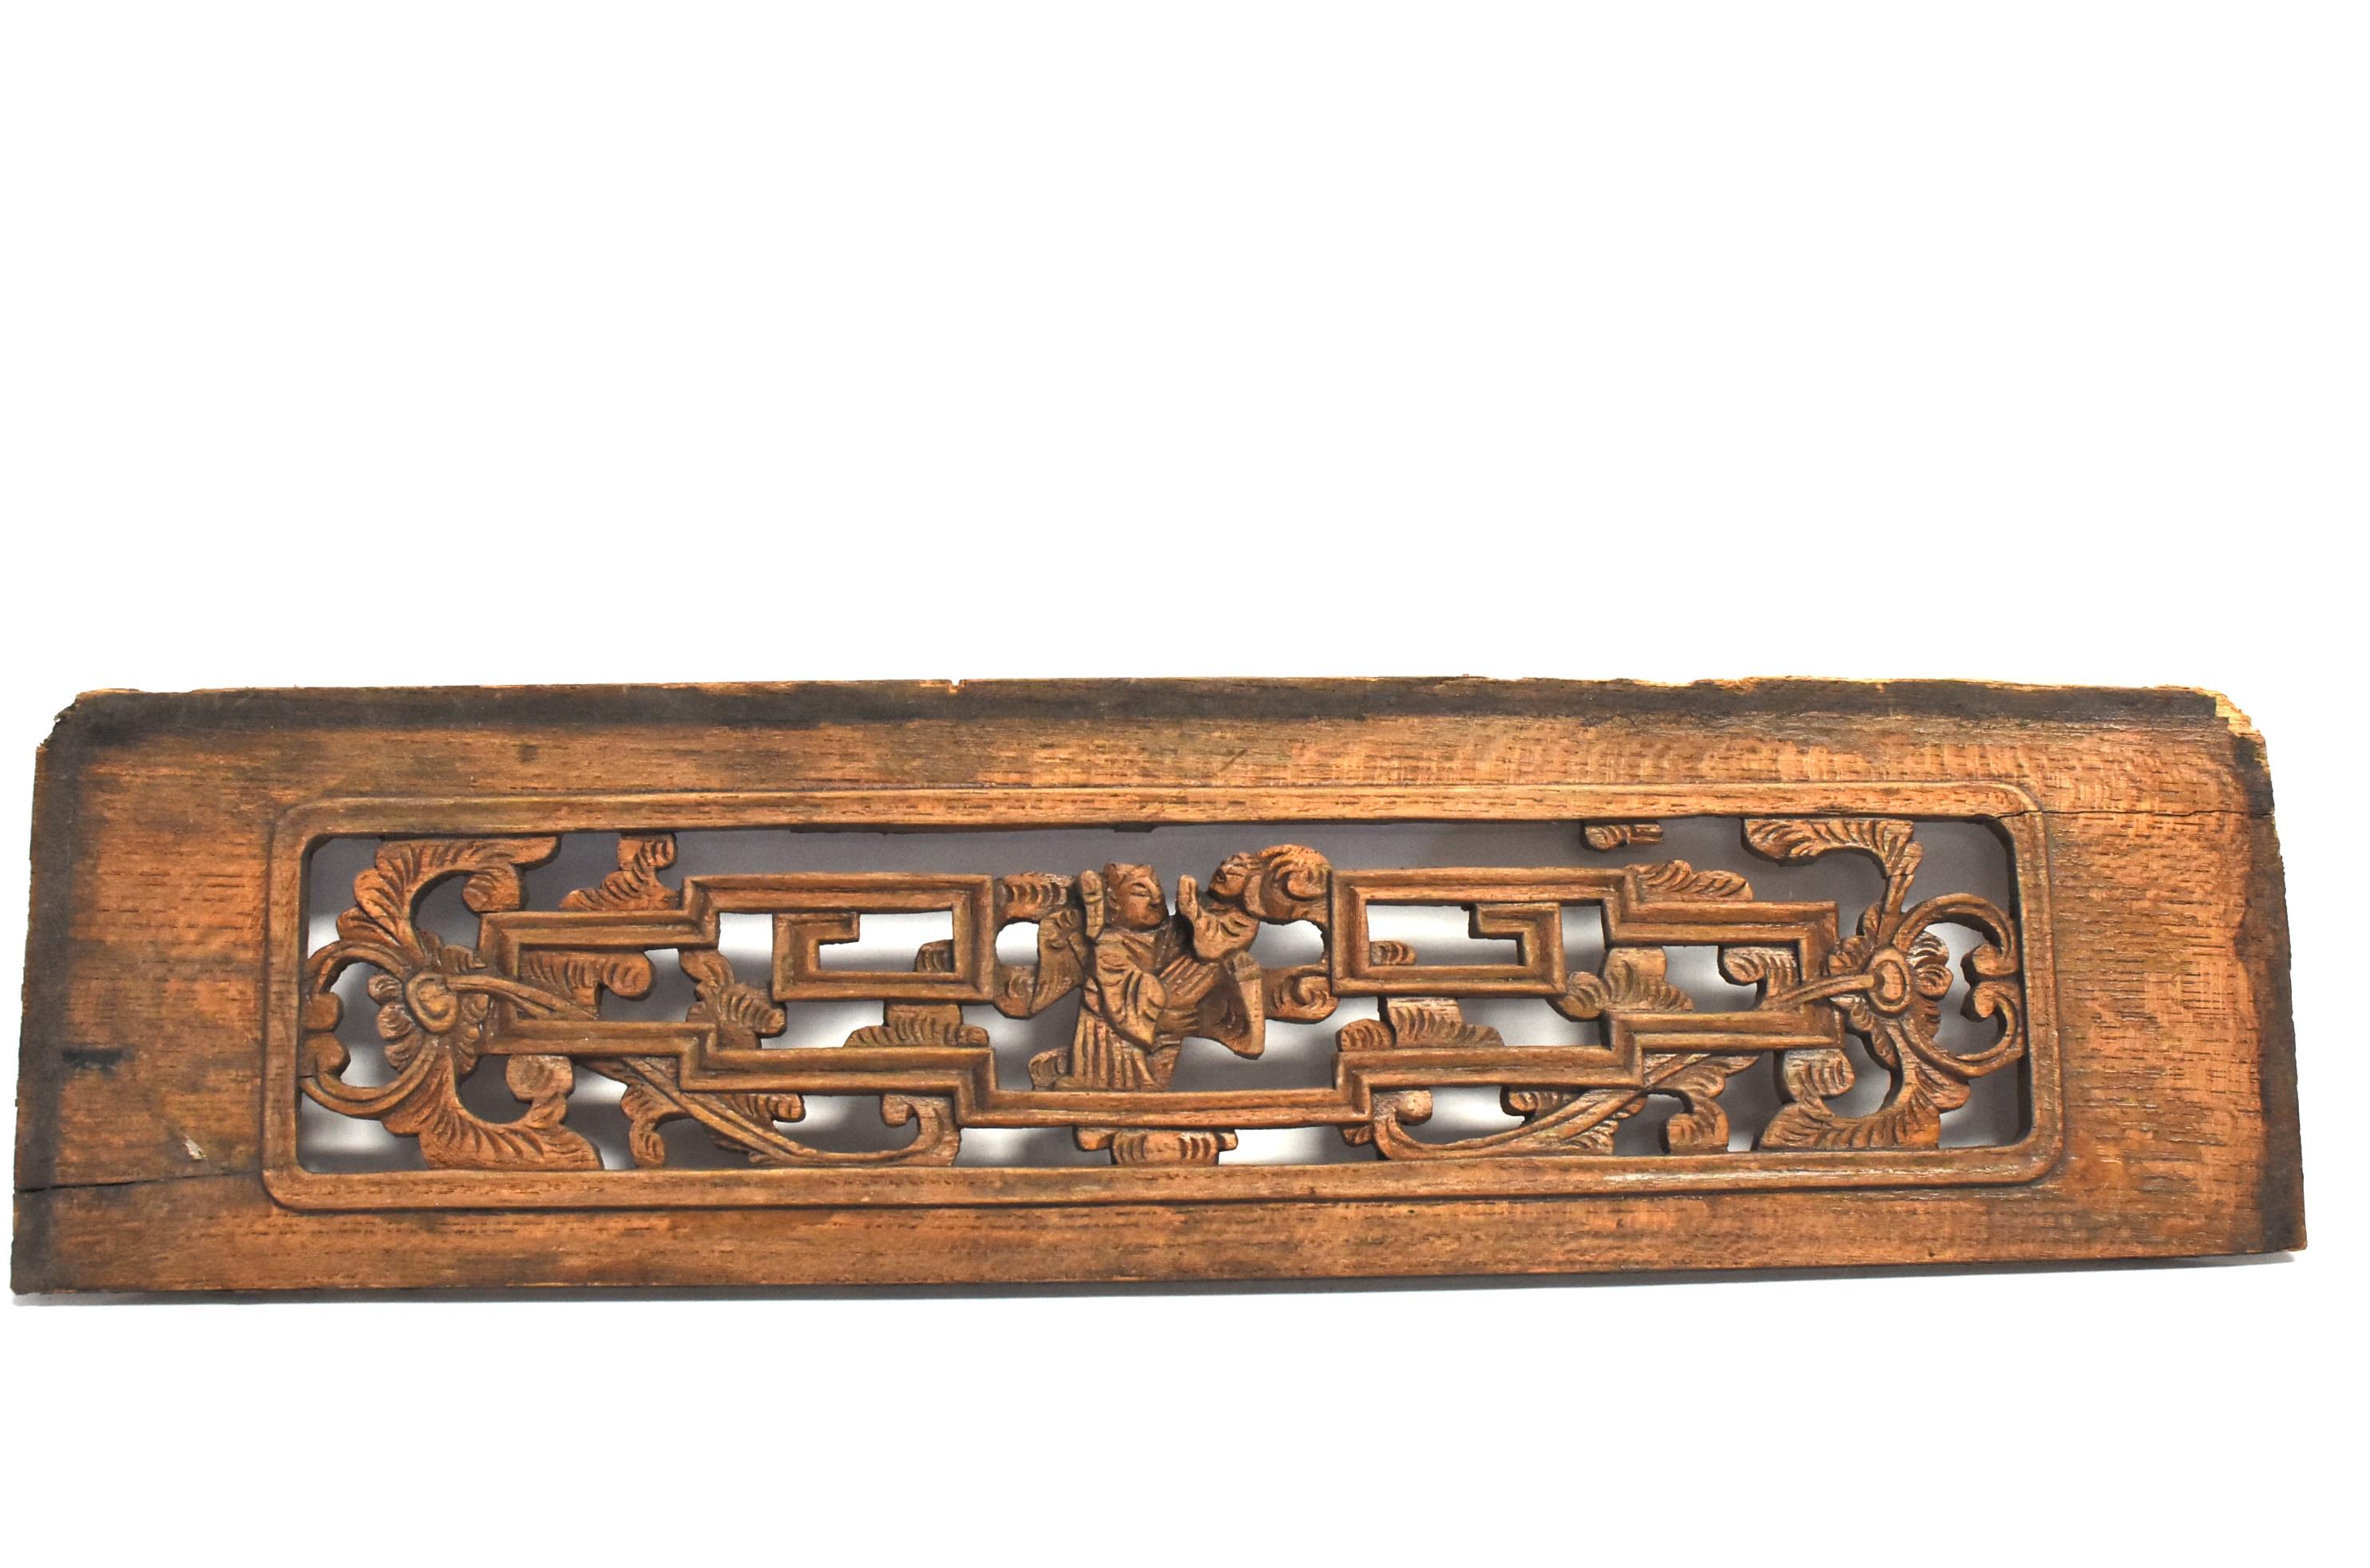 A wonderful set of two 19th century wood carvings, each respectively featuring father and grandfather holding a new baby. Eternity scrolls intertwined with peony stems, symbols of longevity and prosperity. Vivid expressions.